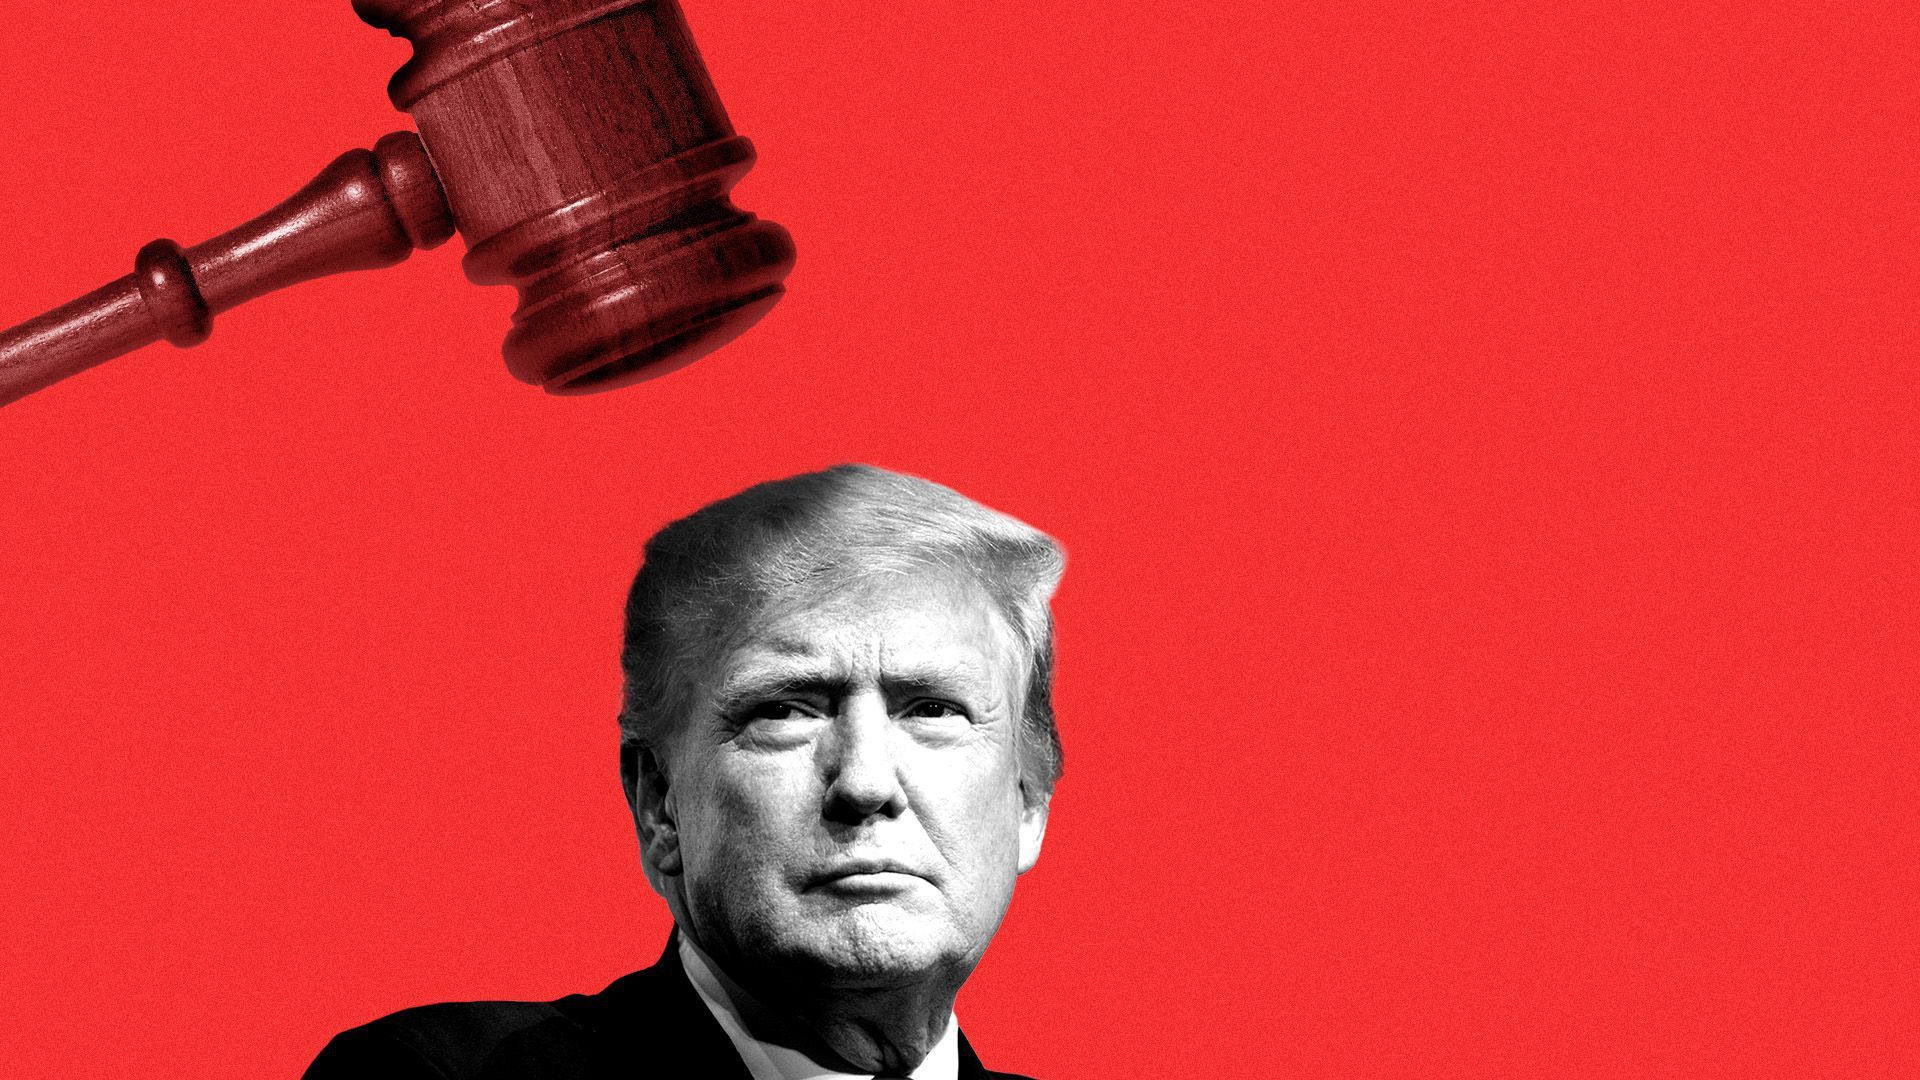 illustration of Trump with gavel above his head